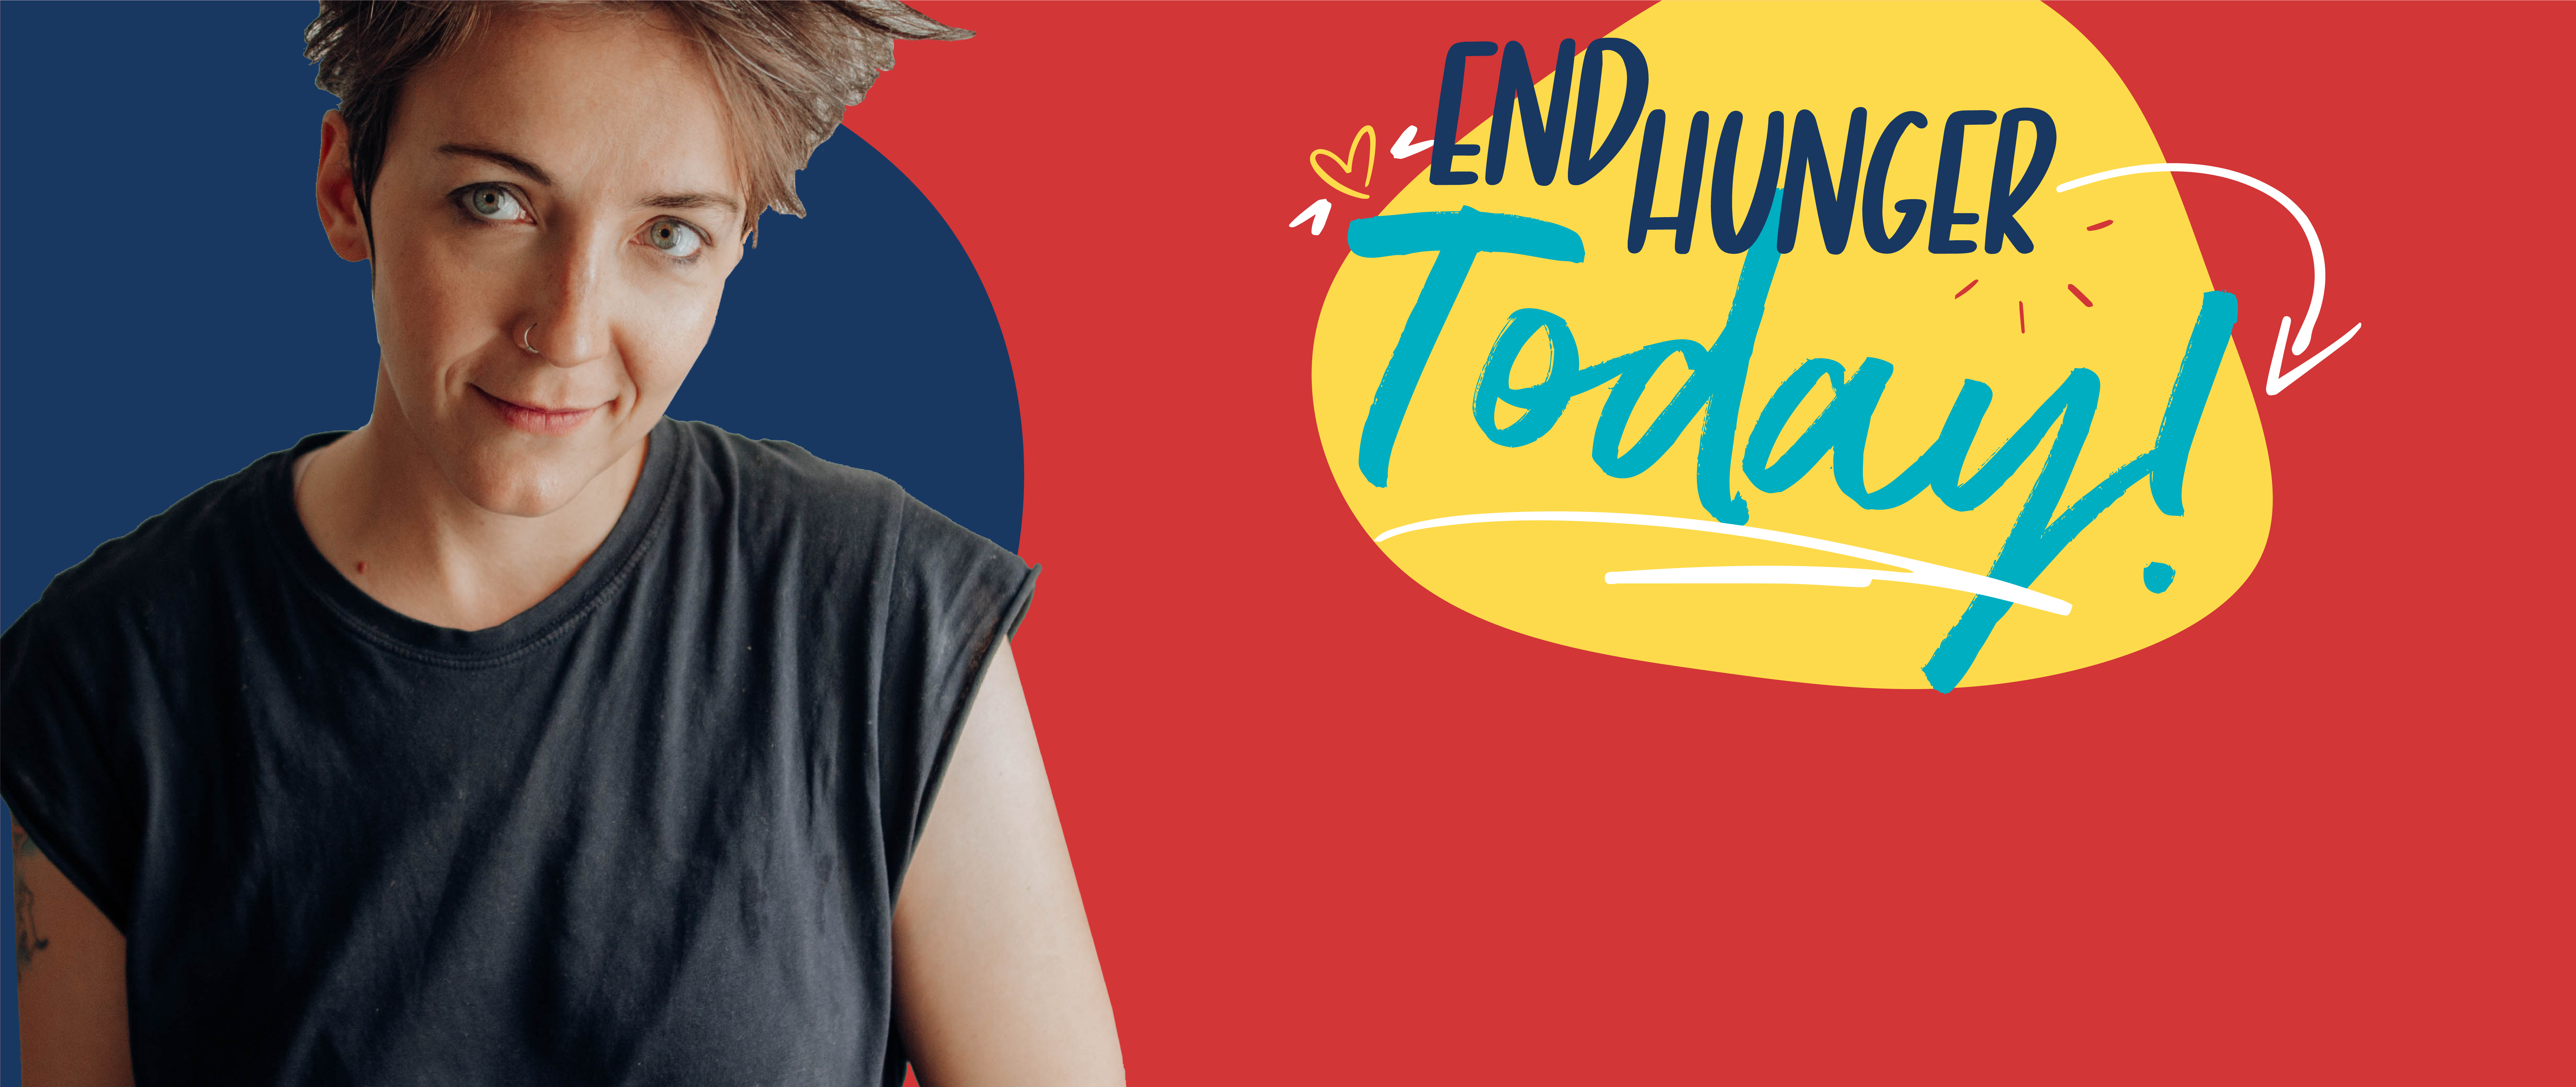 End Hunger Today